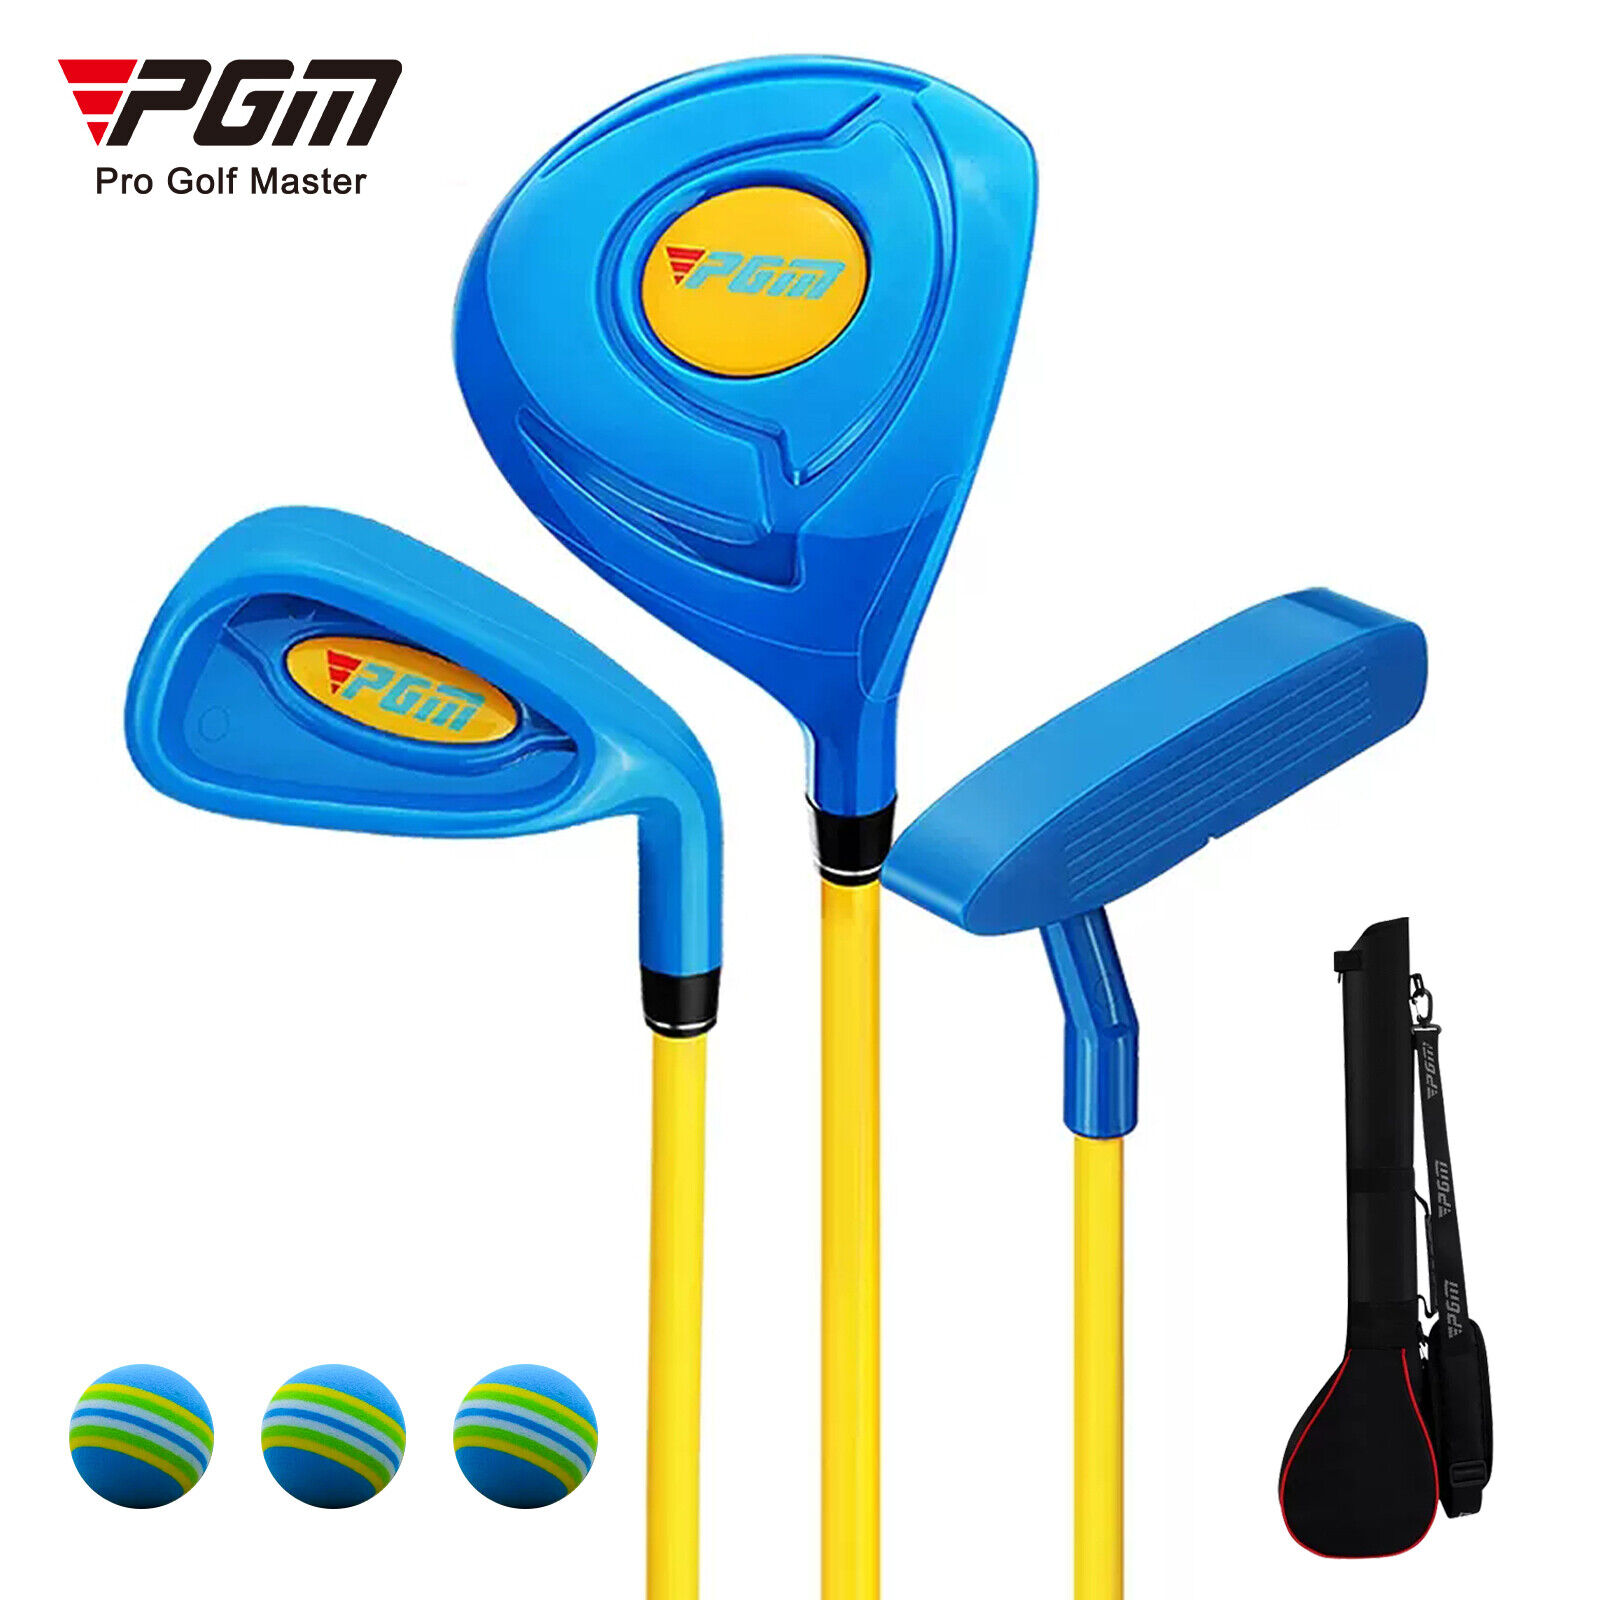 PGM Children\'s Golf Club Set Includes Wood, Iron,Putter Clubs -can Hit Real Ball